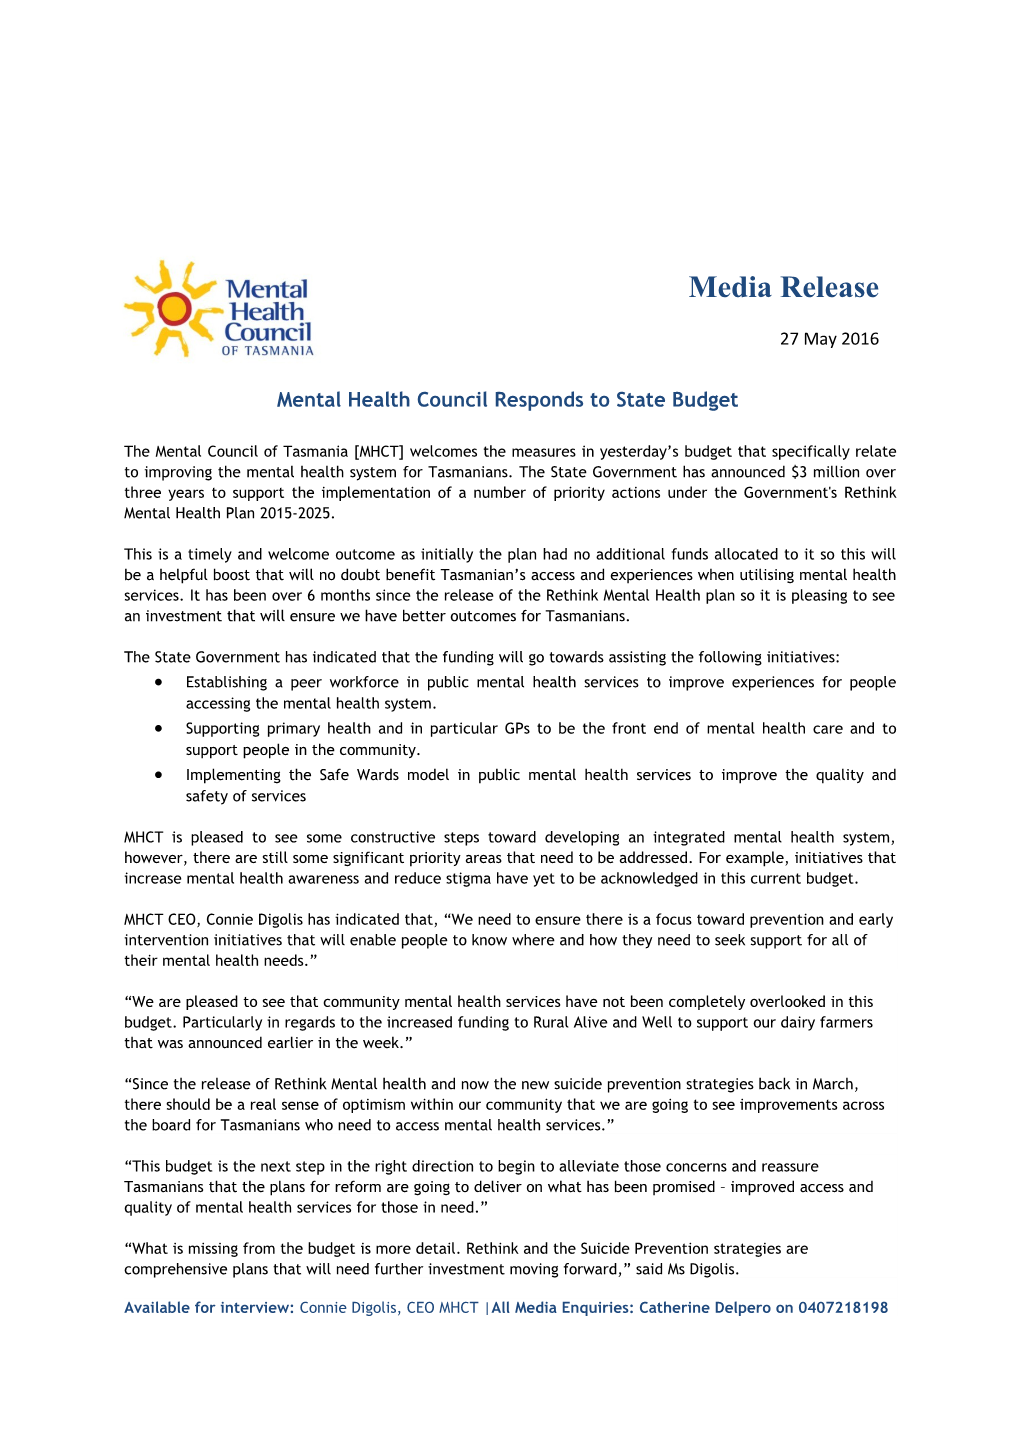 Mental Health Council Responds to State Budget